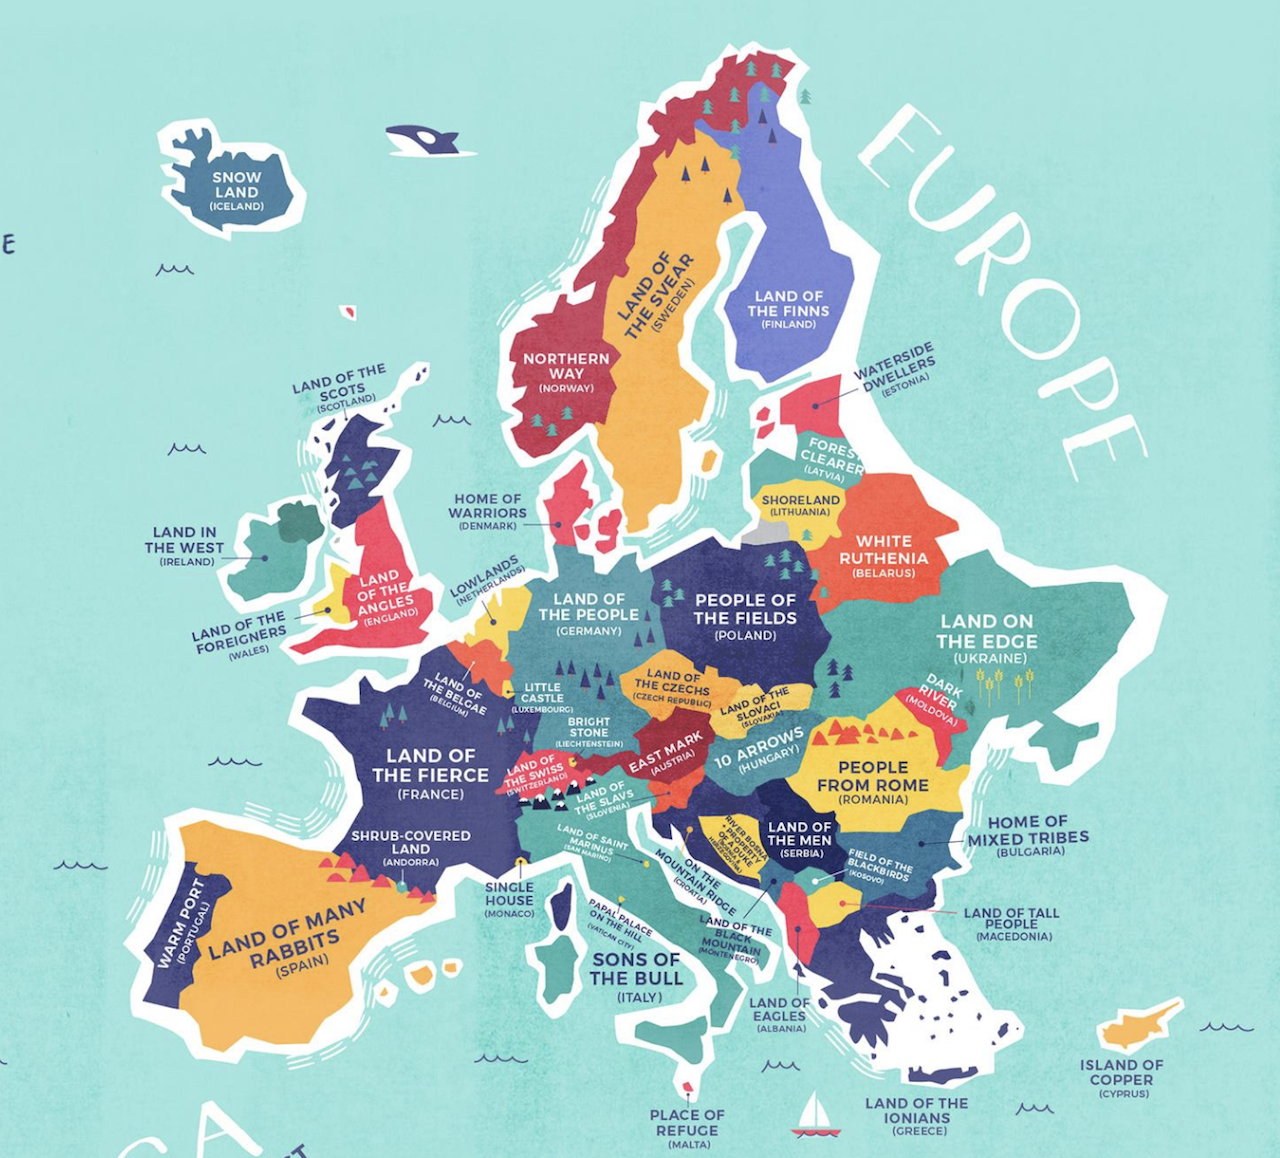 Country names' literal translations